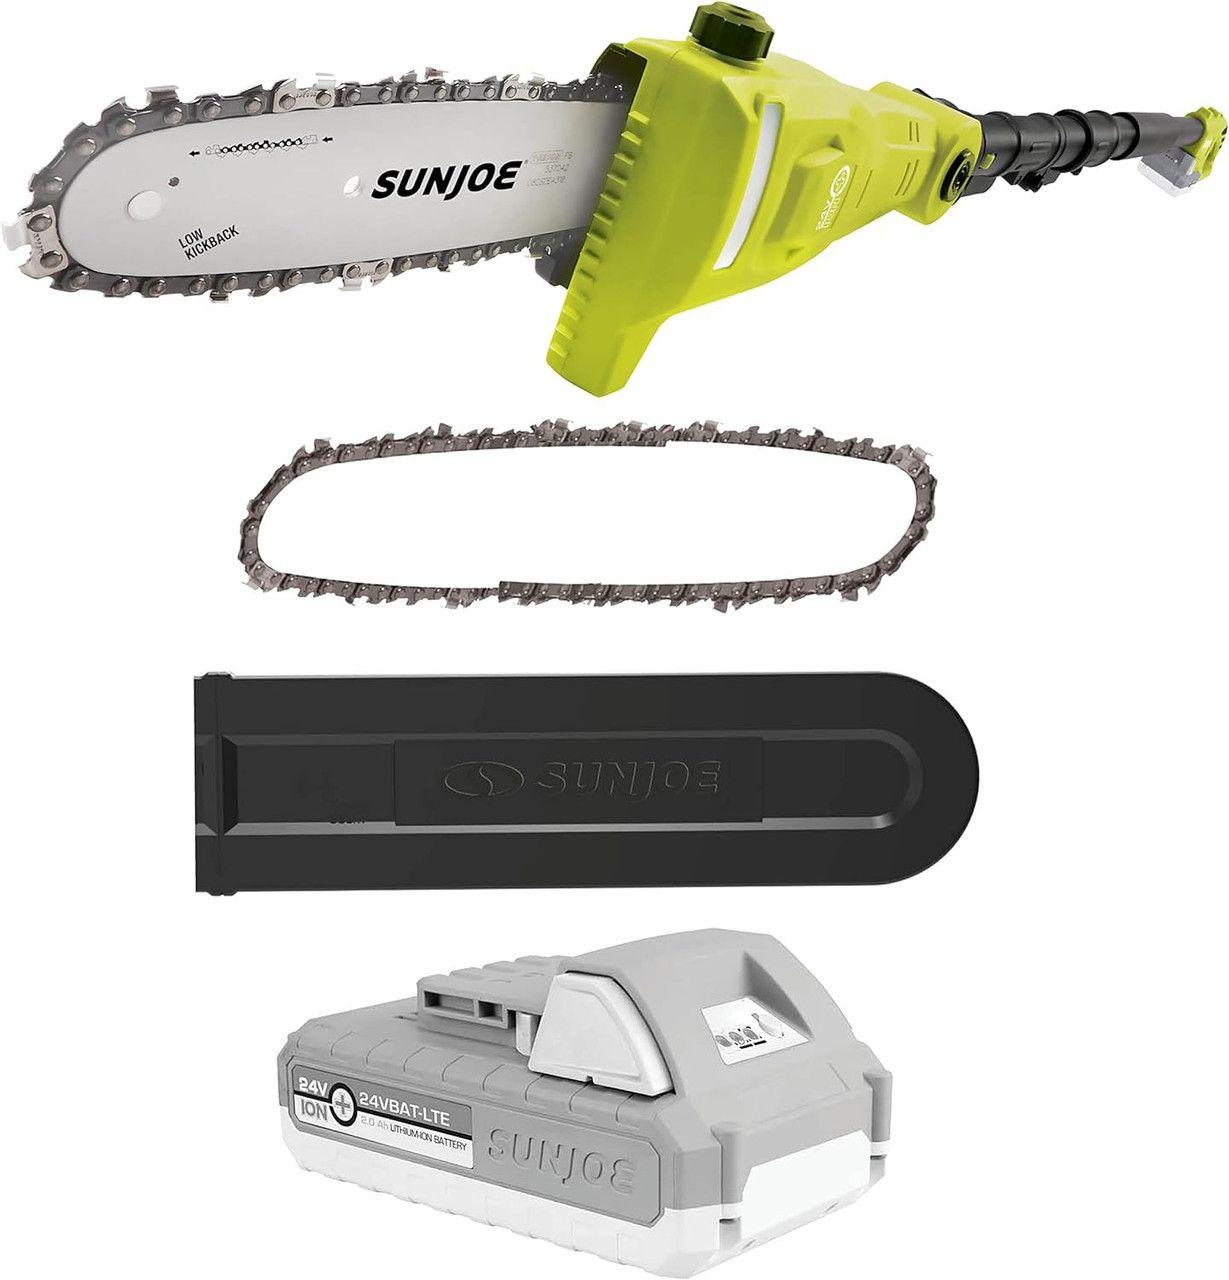 Sun Joe  24V-PS8CMAX-LTE 8" 24-Volt IONMAX Cordless Telescoping Pole Chain Saw Kit - Green - Excellent